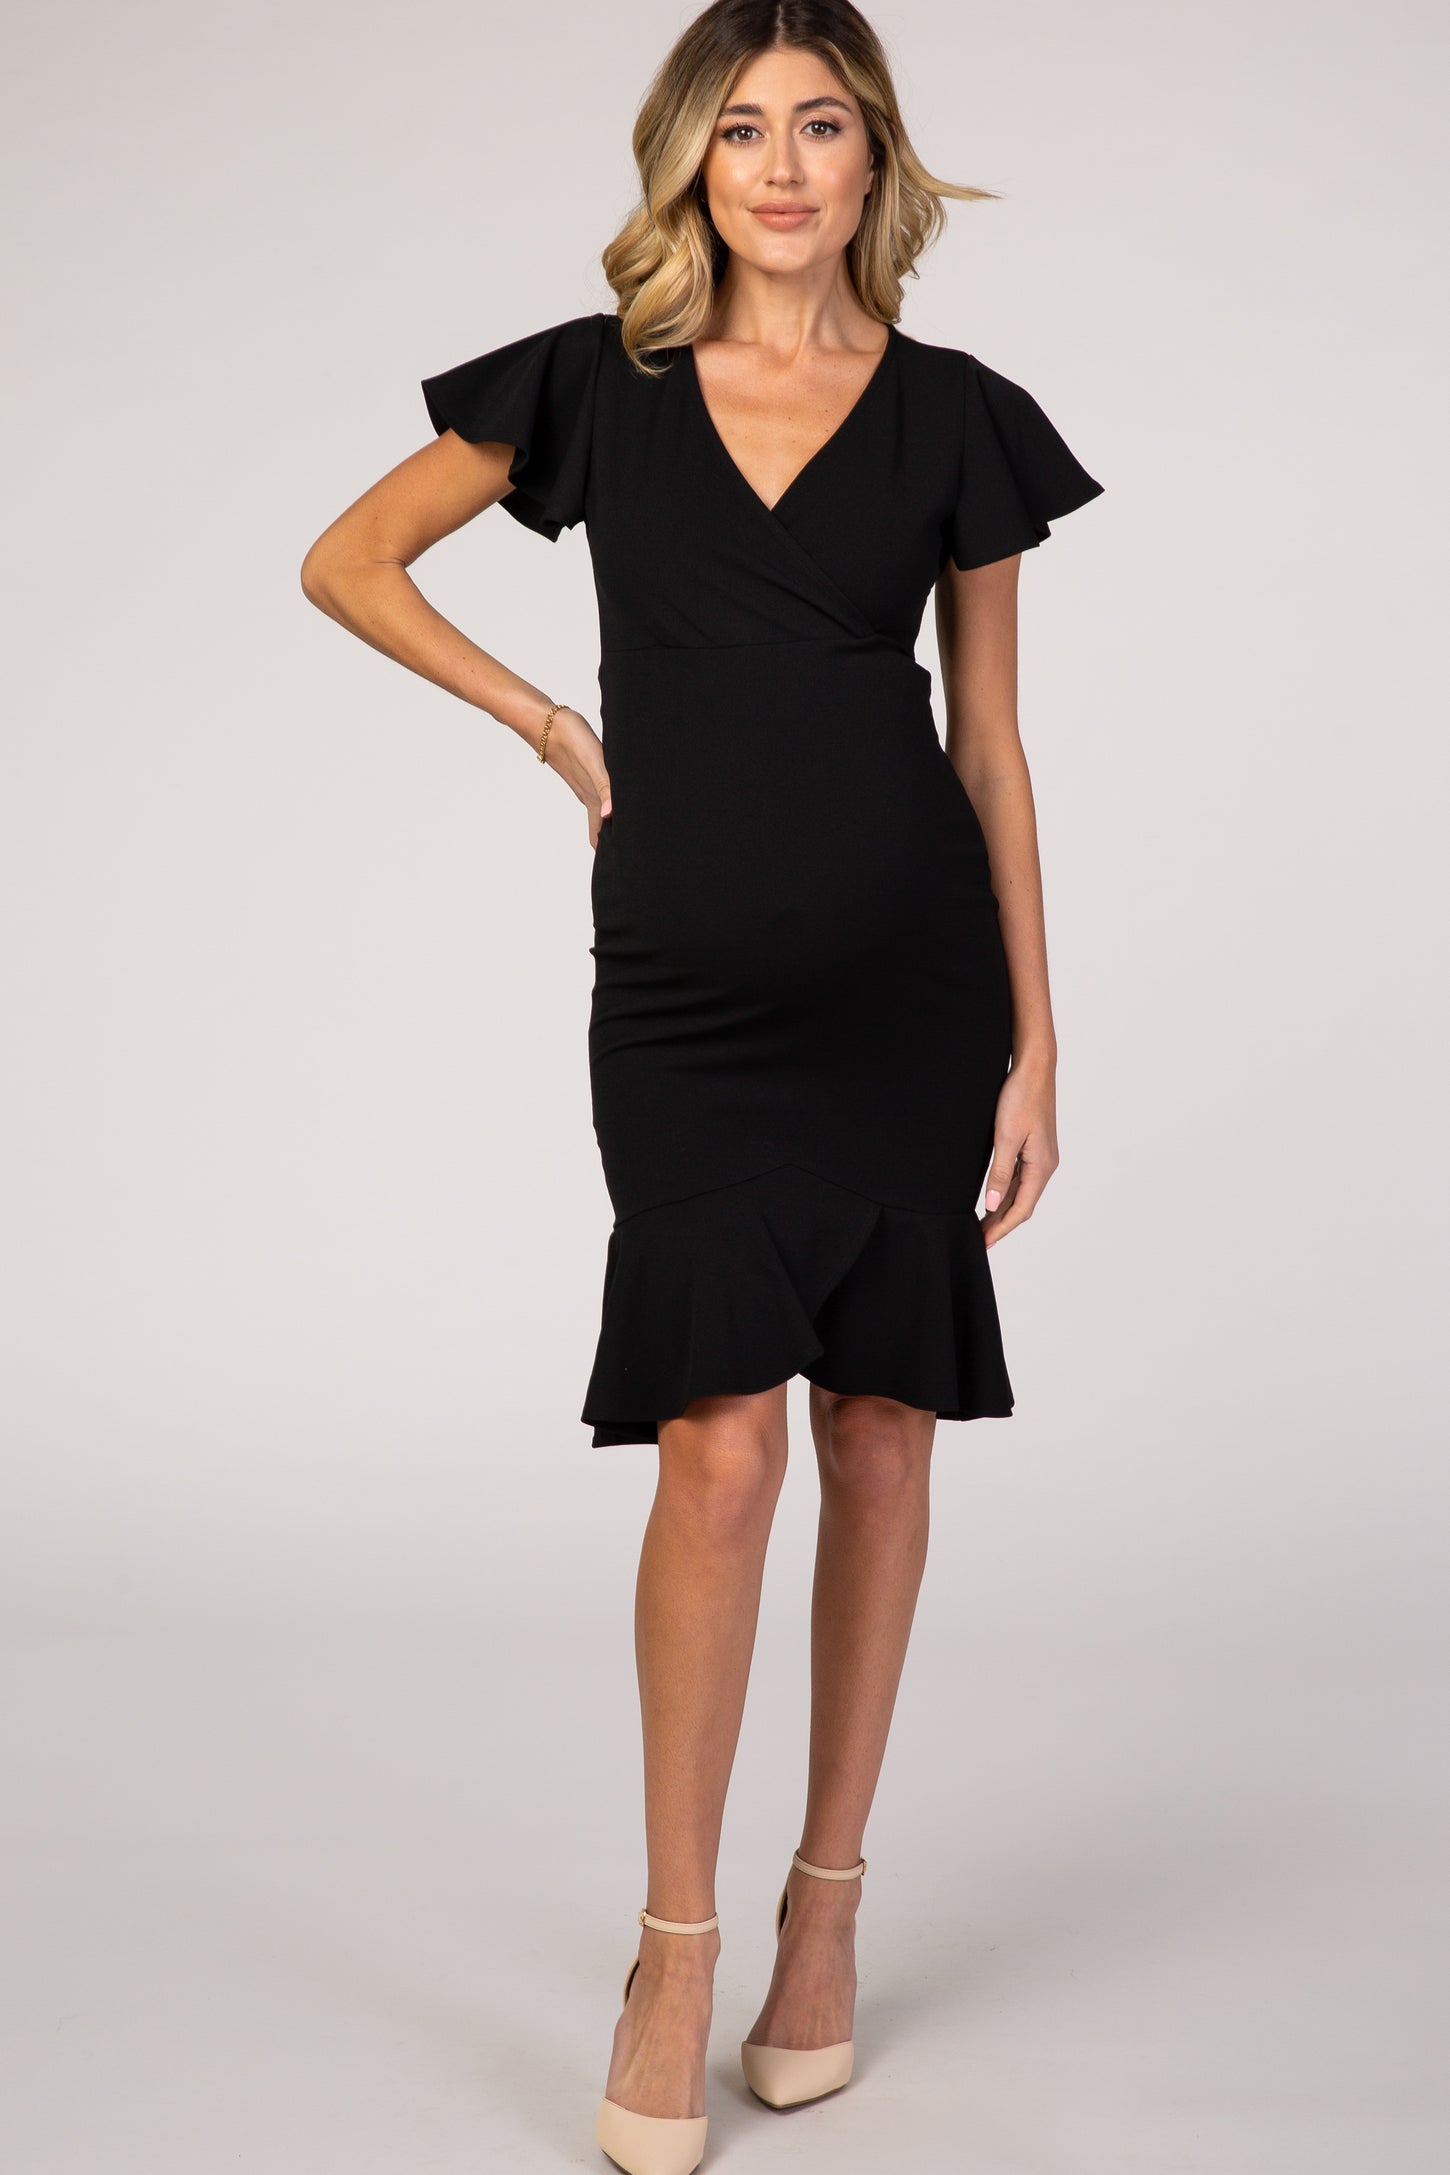 PinkBlush Black Ruffle Accent Fitted Maternity Wrap Dress